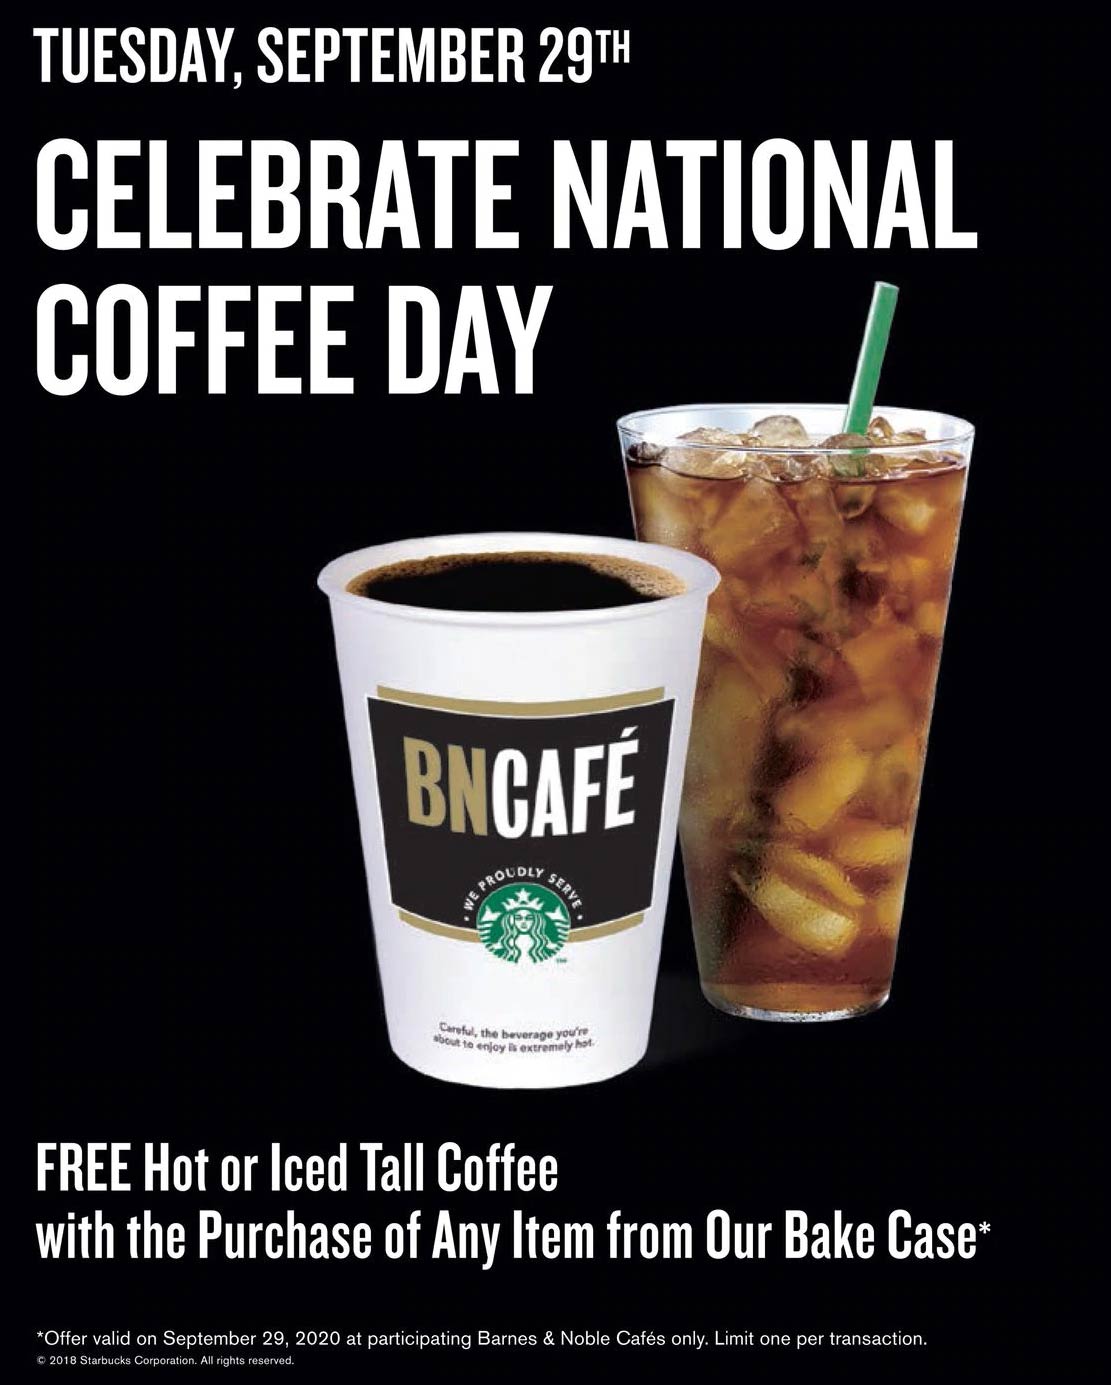 Barnes & Noble restaurants Coupon  Free Starbucks coffee with your bake case item today at Barnes & Noble cafe #barnesnoble 